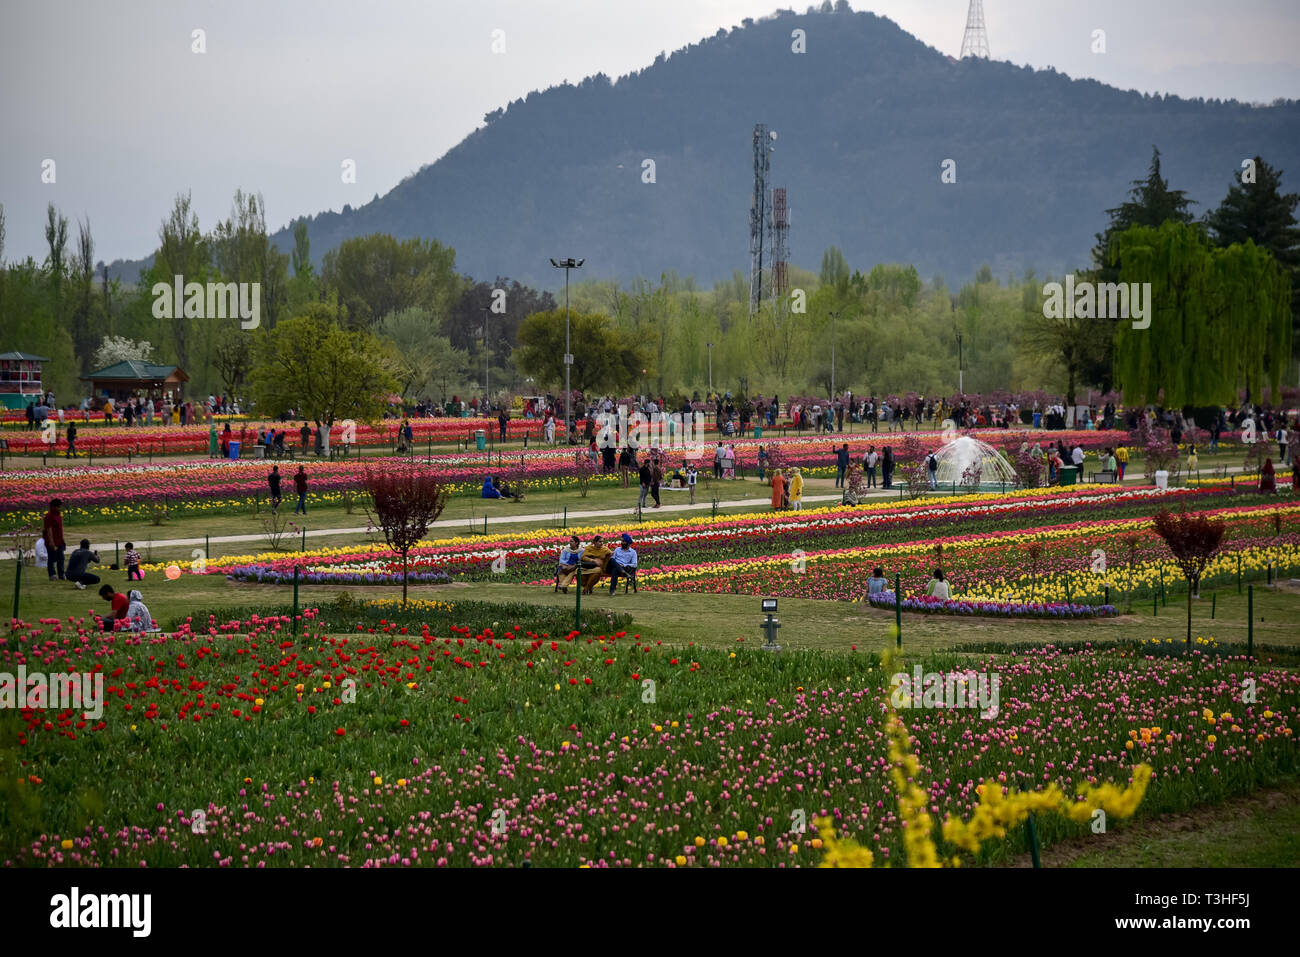 Tourists seen enjoying at famous Indira Gandhi Memorial Tulip garden, Asia's largest tulip garden, in Srinagar summer capital of Jammu and Kashmir. It is the largest tulip garden in Asia spread over an area of 30 hectares. It is located in Siraj Bagh on the foothill of Zabarwan Range. It is one of tourist attraction place in Srinagar. Stock Photo